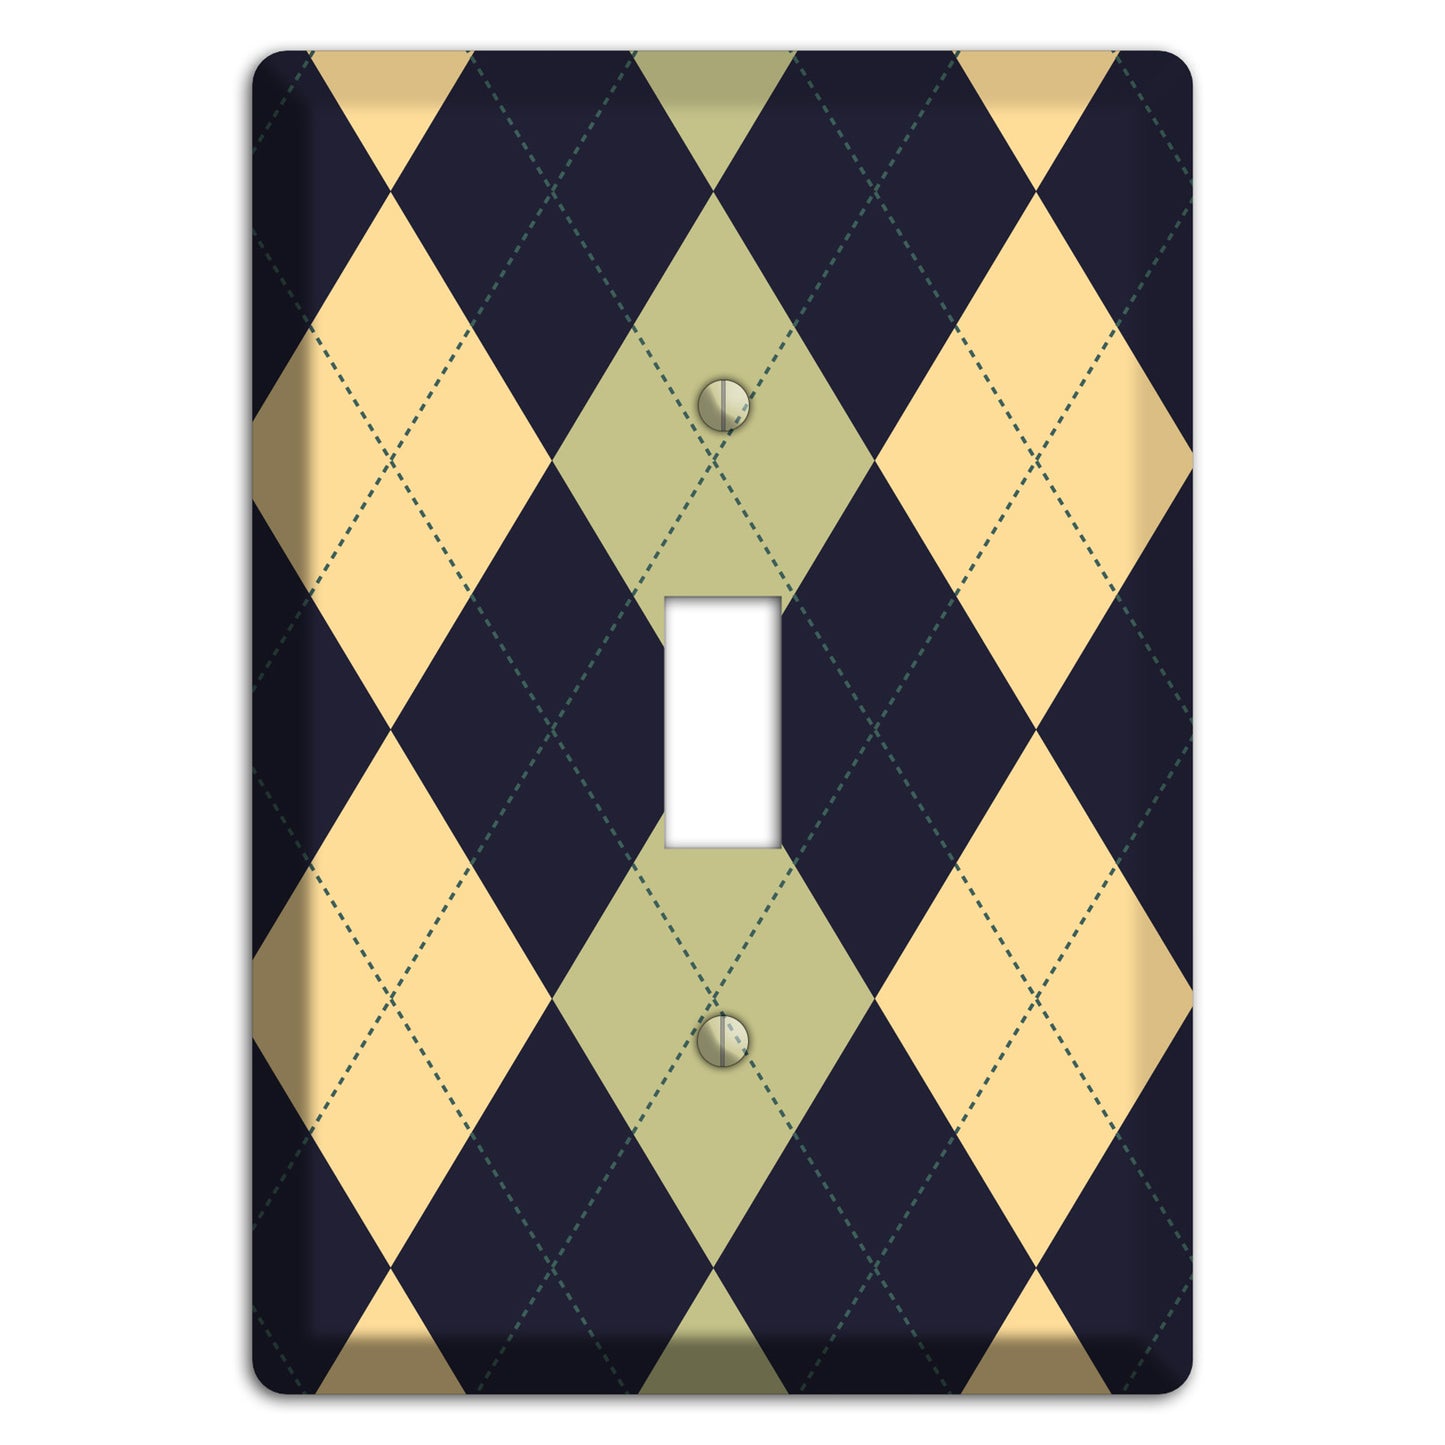 Yellow and Tan Argyle Cover Plates